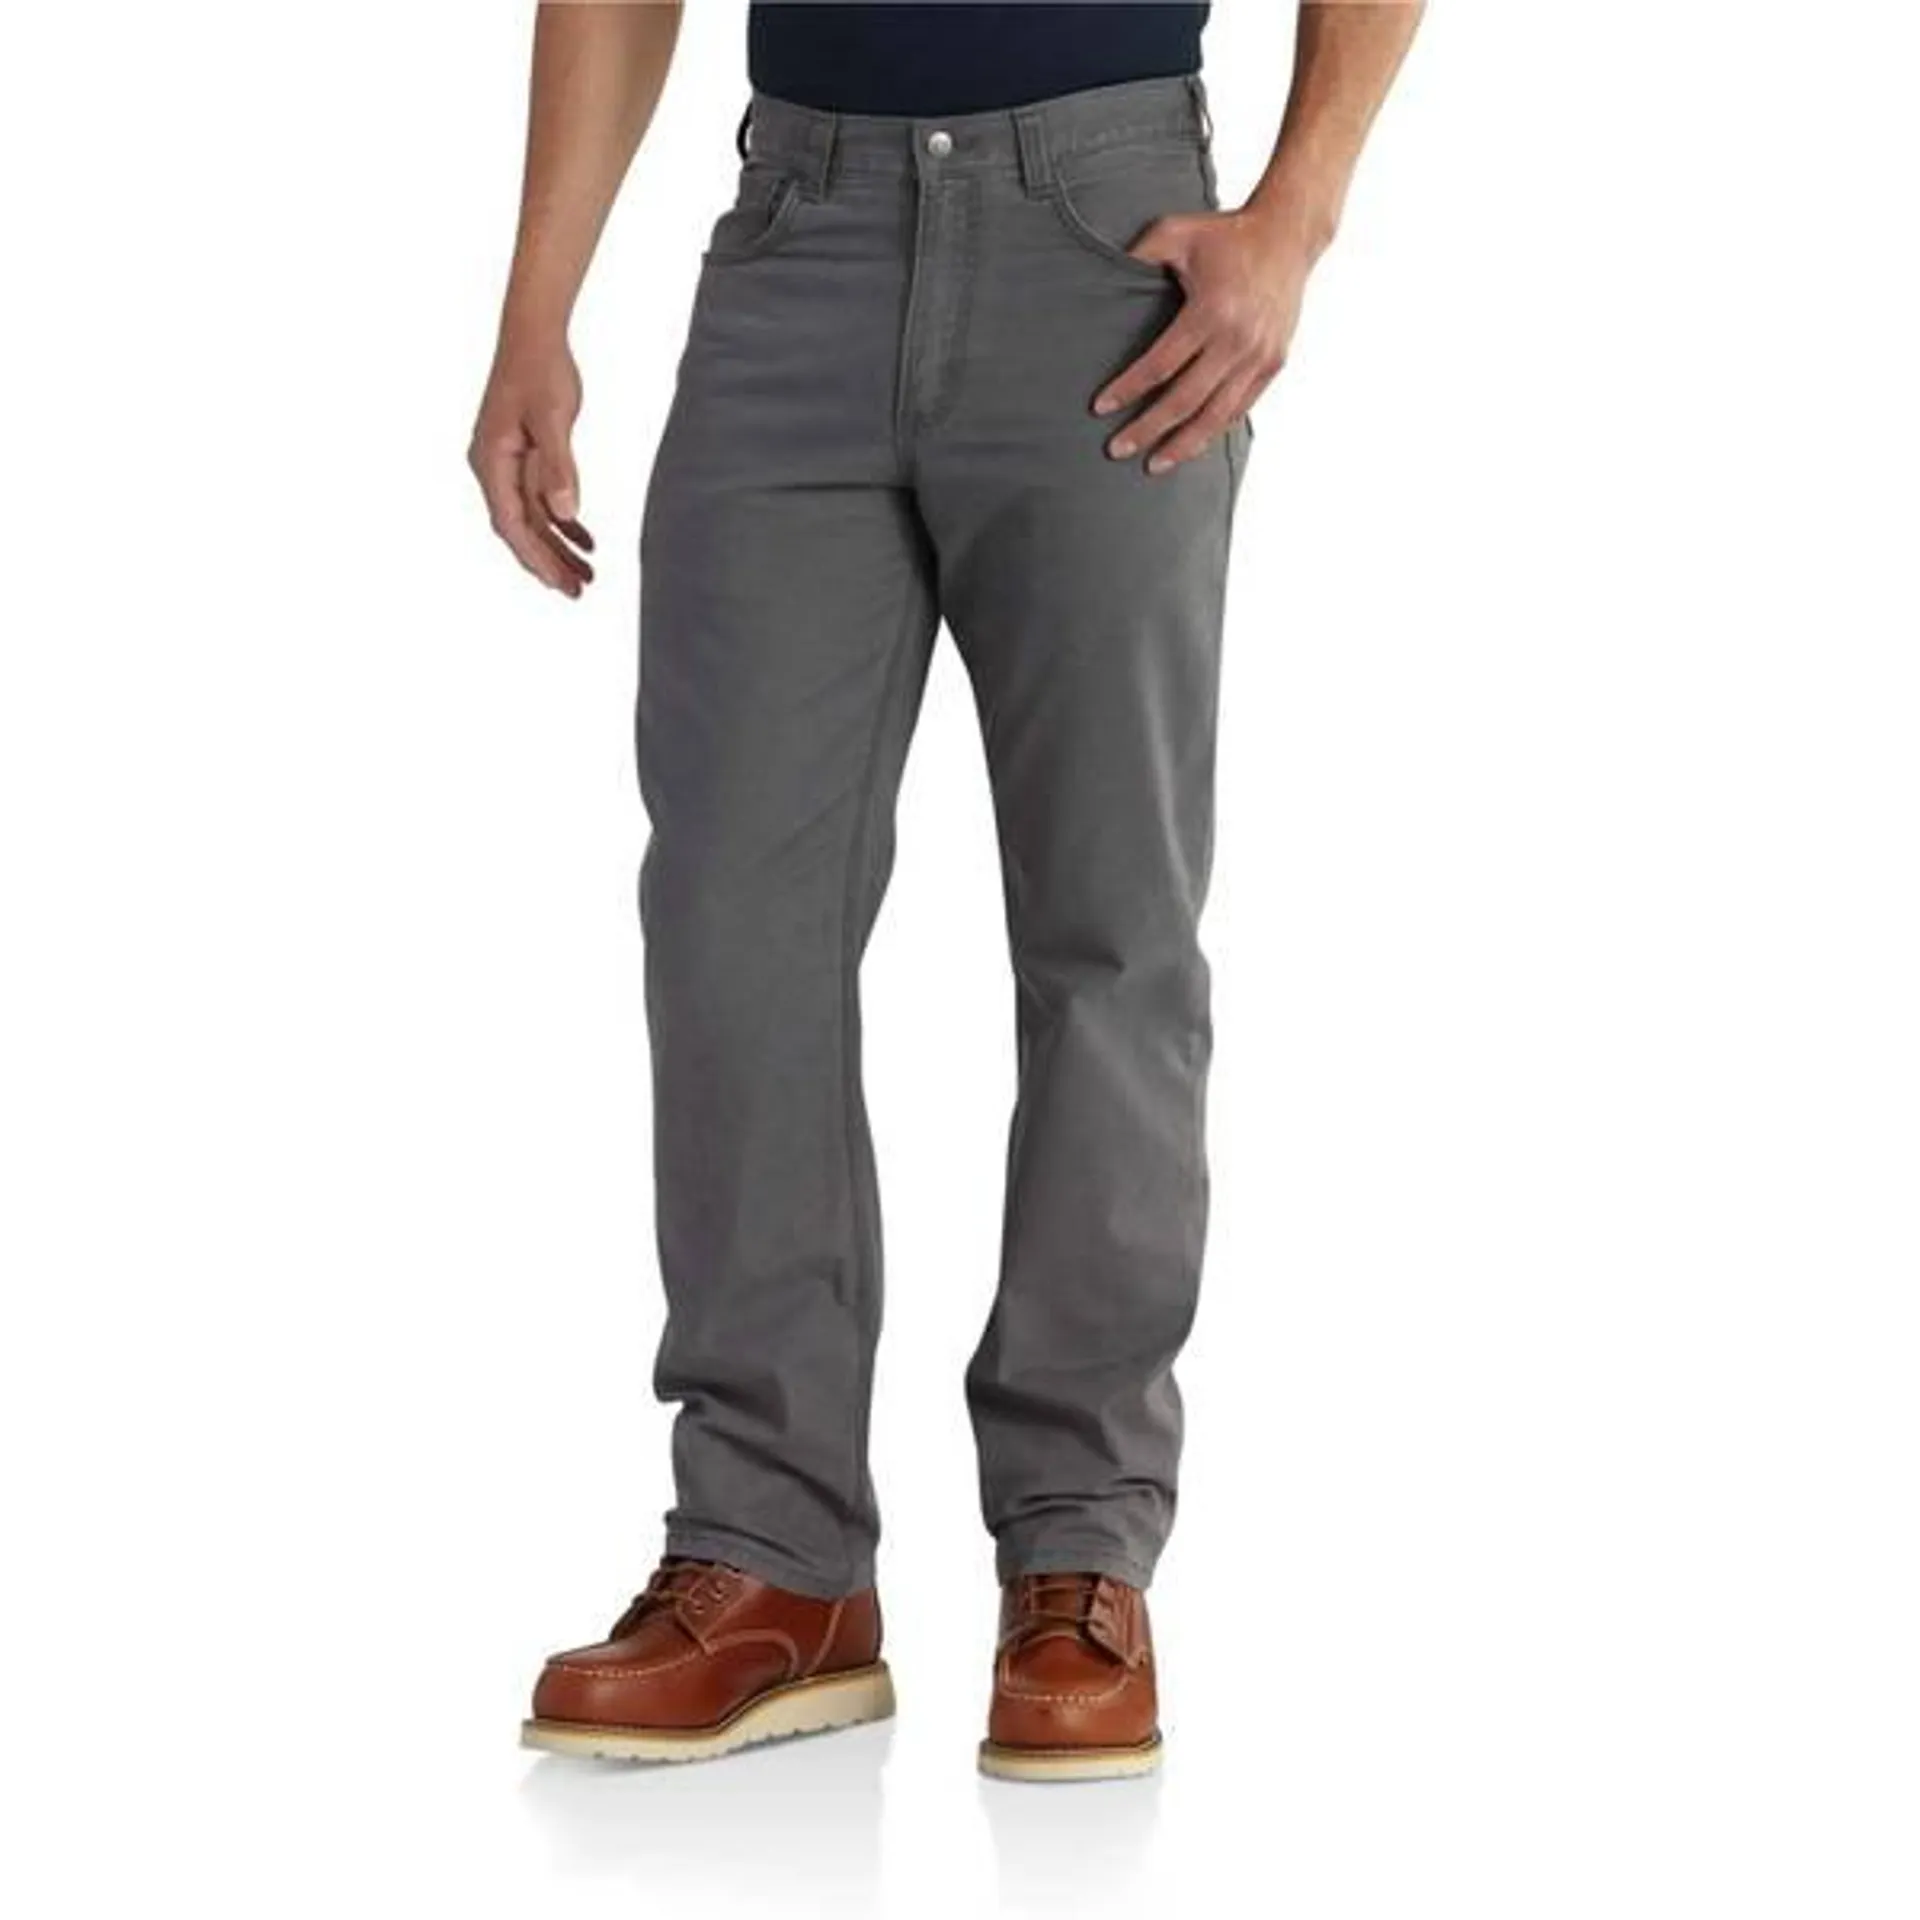 Men's Rugged Flex Relaxed Fit Canvas 5-Pocket Work Pants